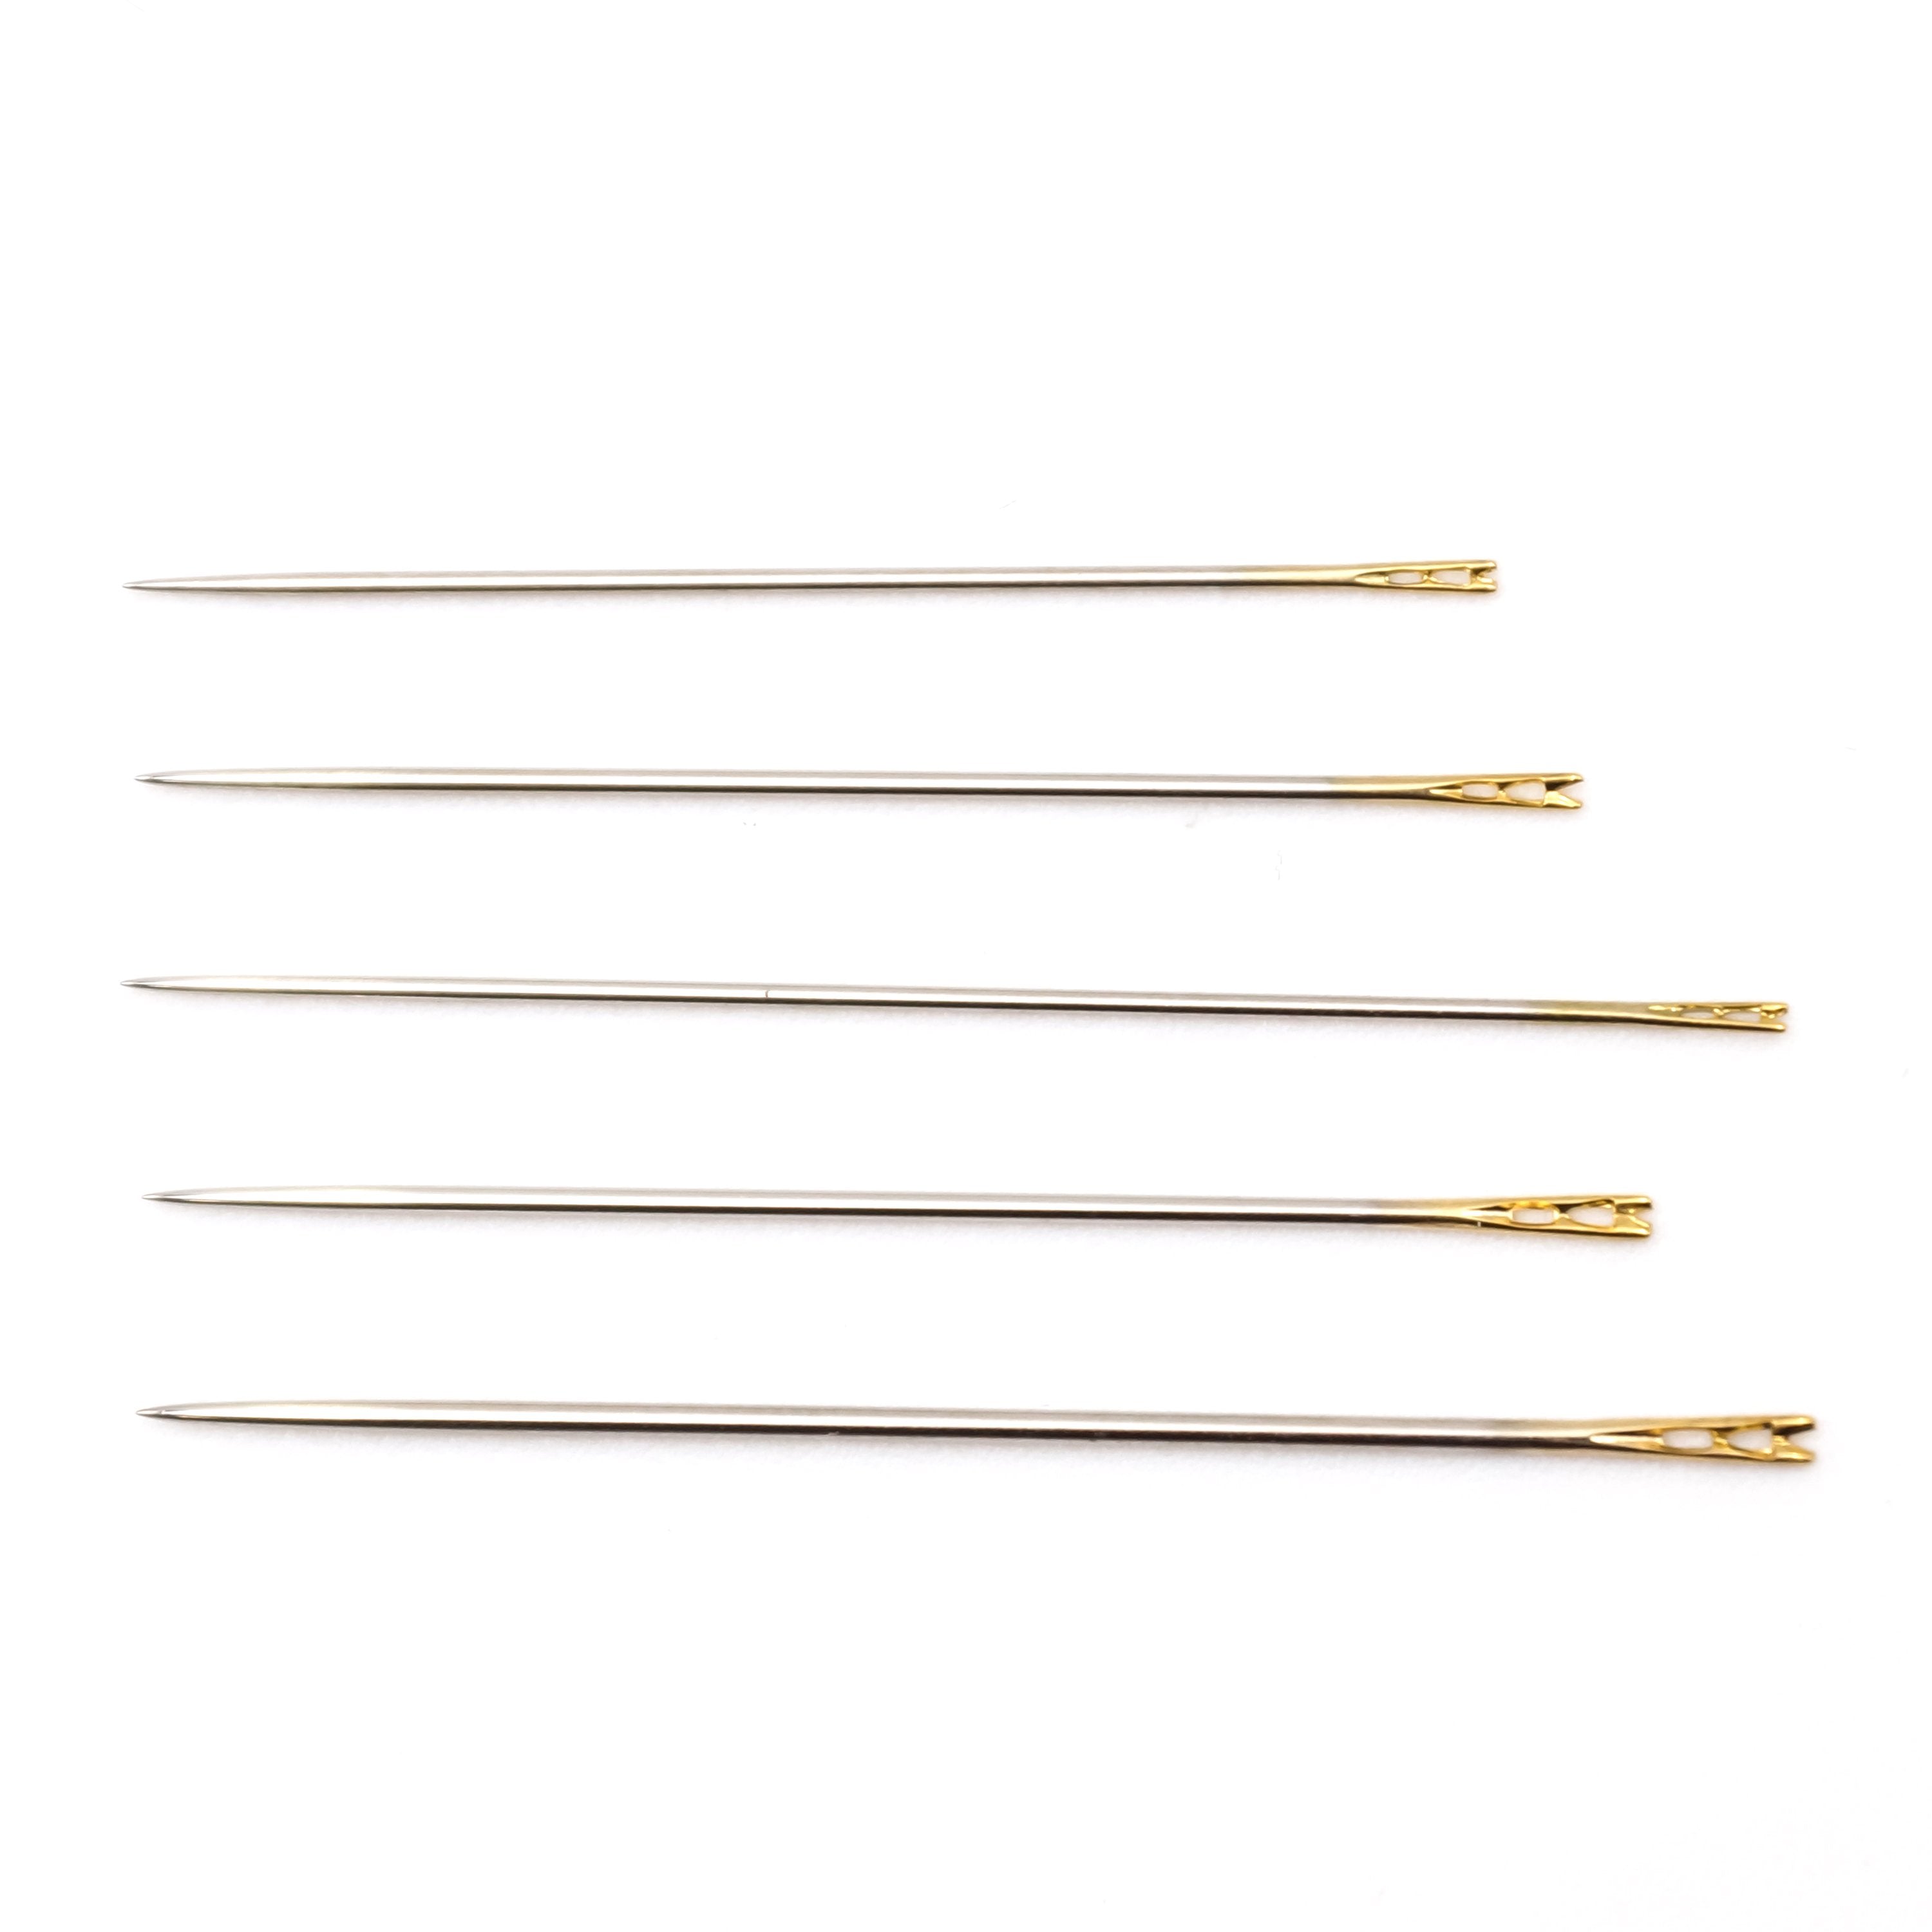  Self Threading Needles for Hand Sewing - 24 Pieces Easy Thread  Needles,Hand Embroidery Needles for Quilting,Stitch,Side Threading Hand  Sewing Needles with Wood Case Carving Pattern - YAWALL